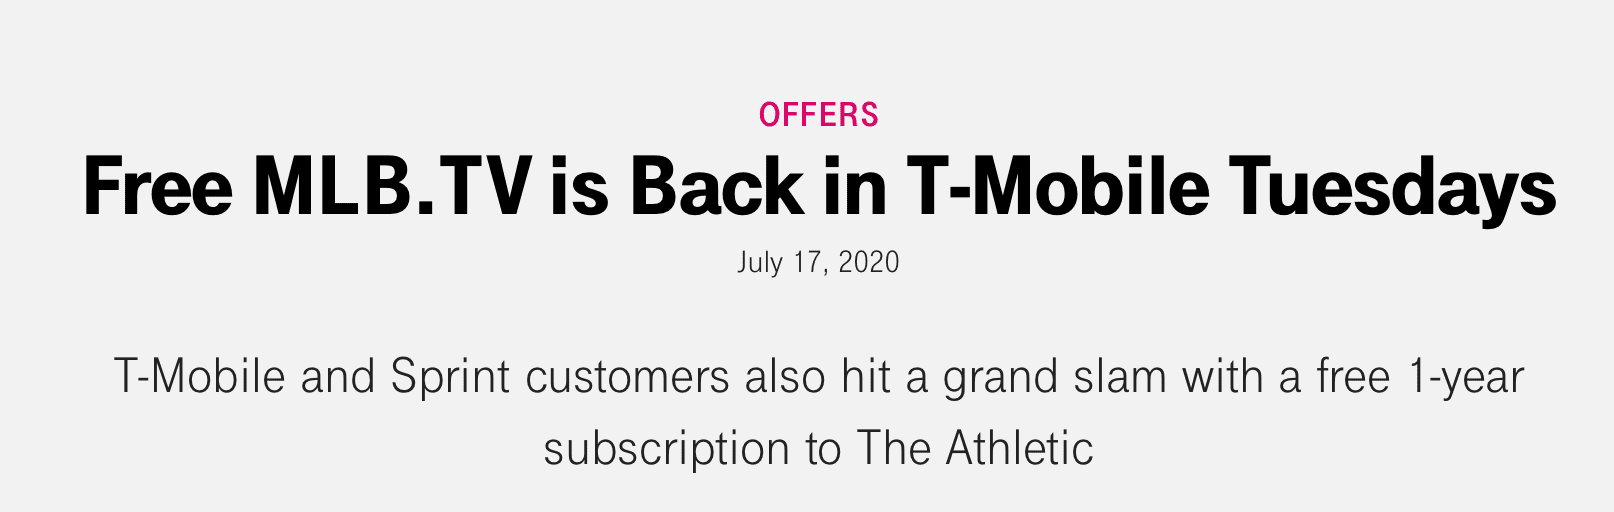 T-Mobile and Sprint Users Get Free Year Of MLB Premium and Free Year of The Athletic ($120 Value; 7/21-8/4)